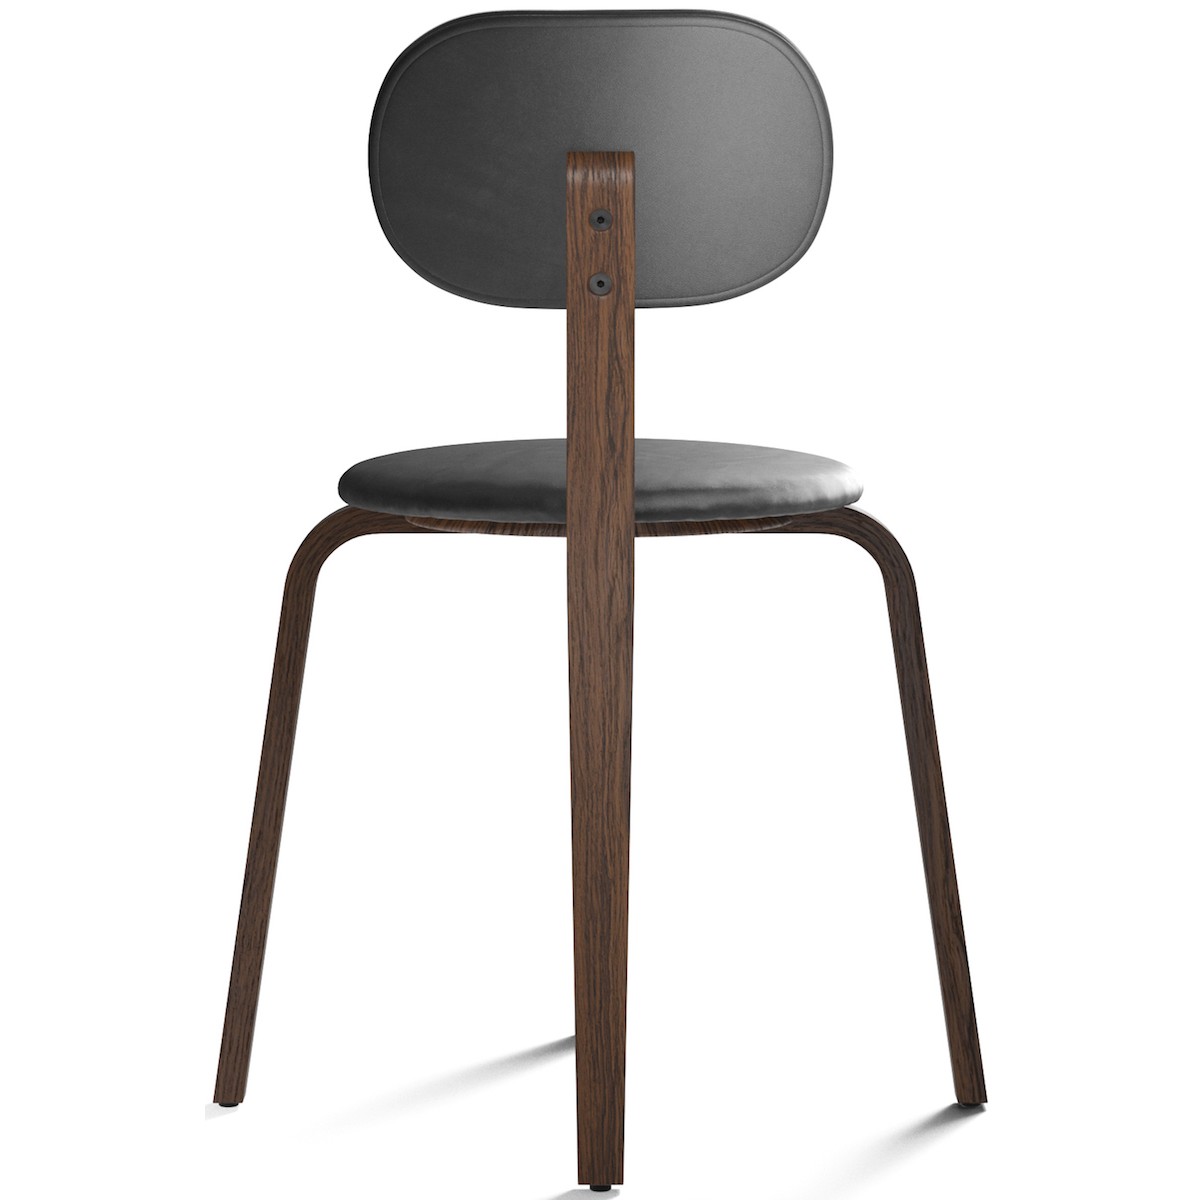 Afteroom Plywood Dining chair – dark stained oak + Dakar leather 0842